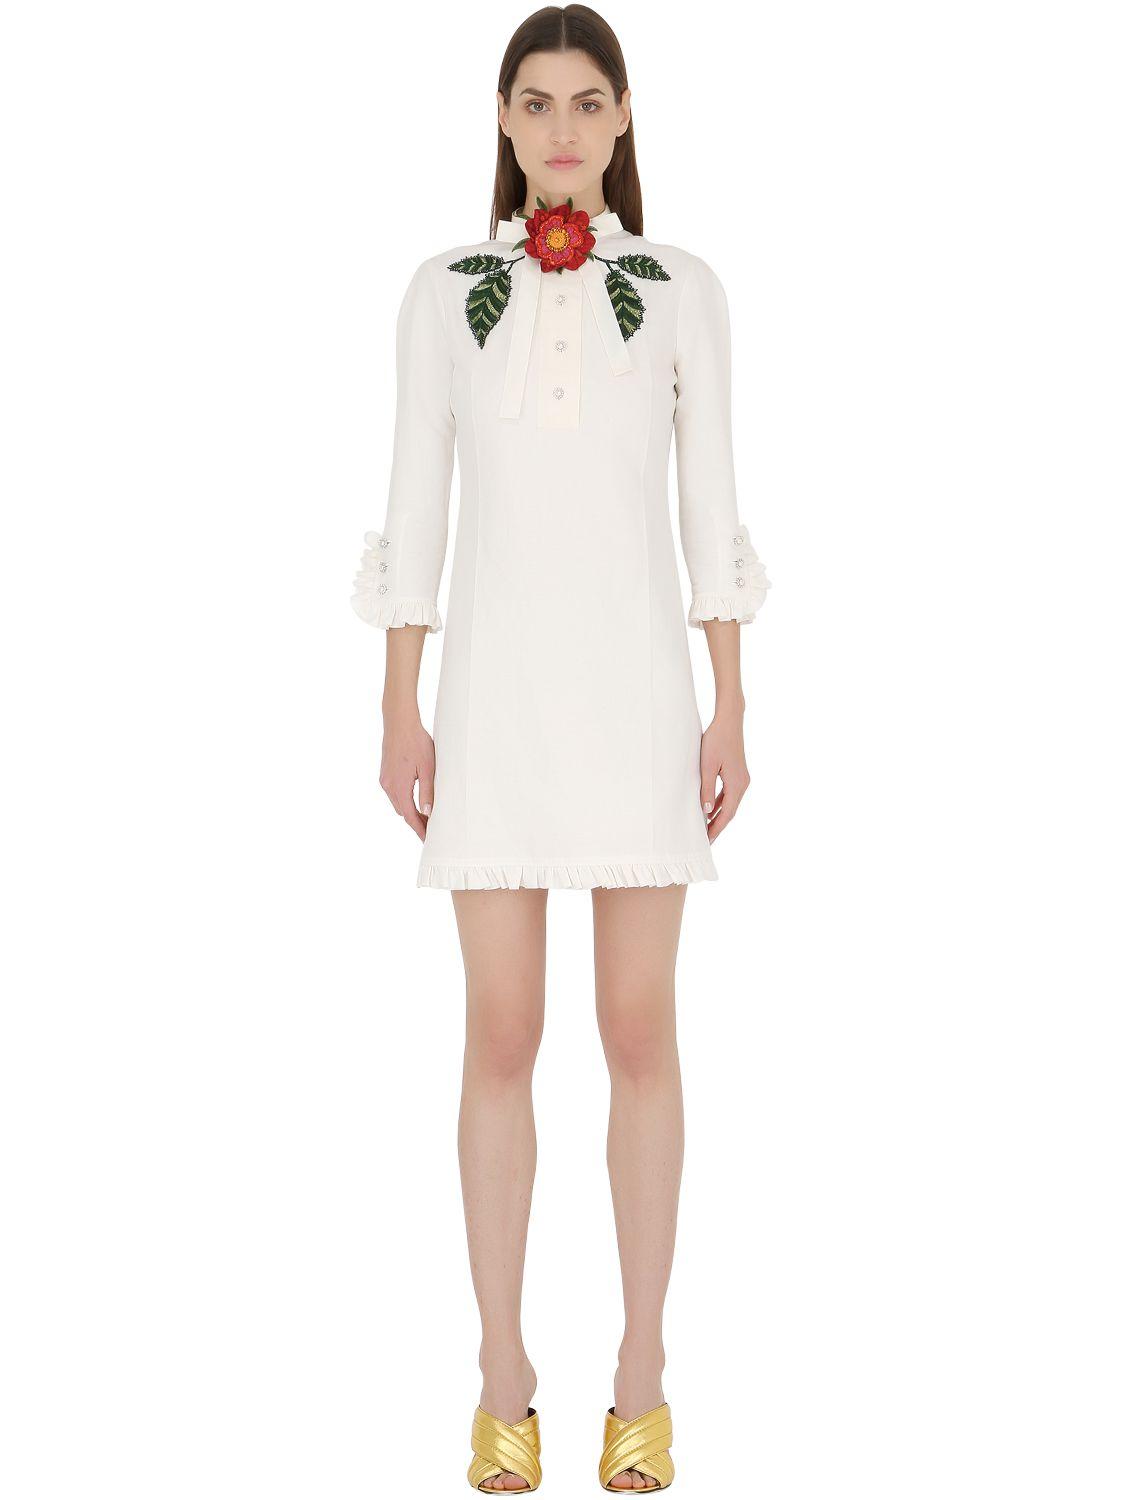 Lyst - Gucci Embellished Washed Cotton & Linen Dress in White